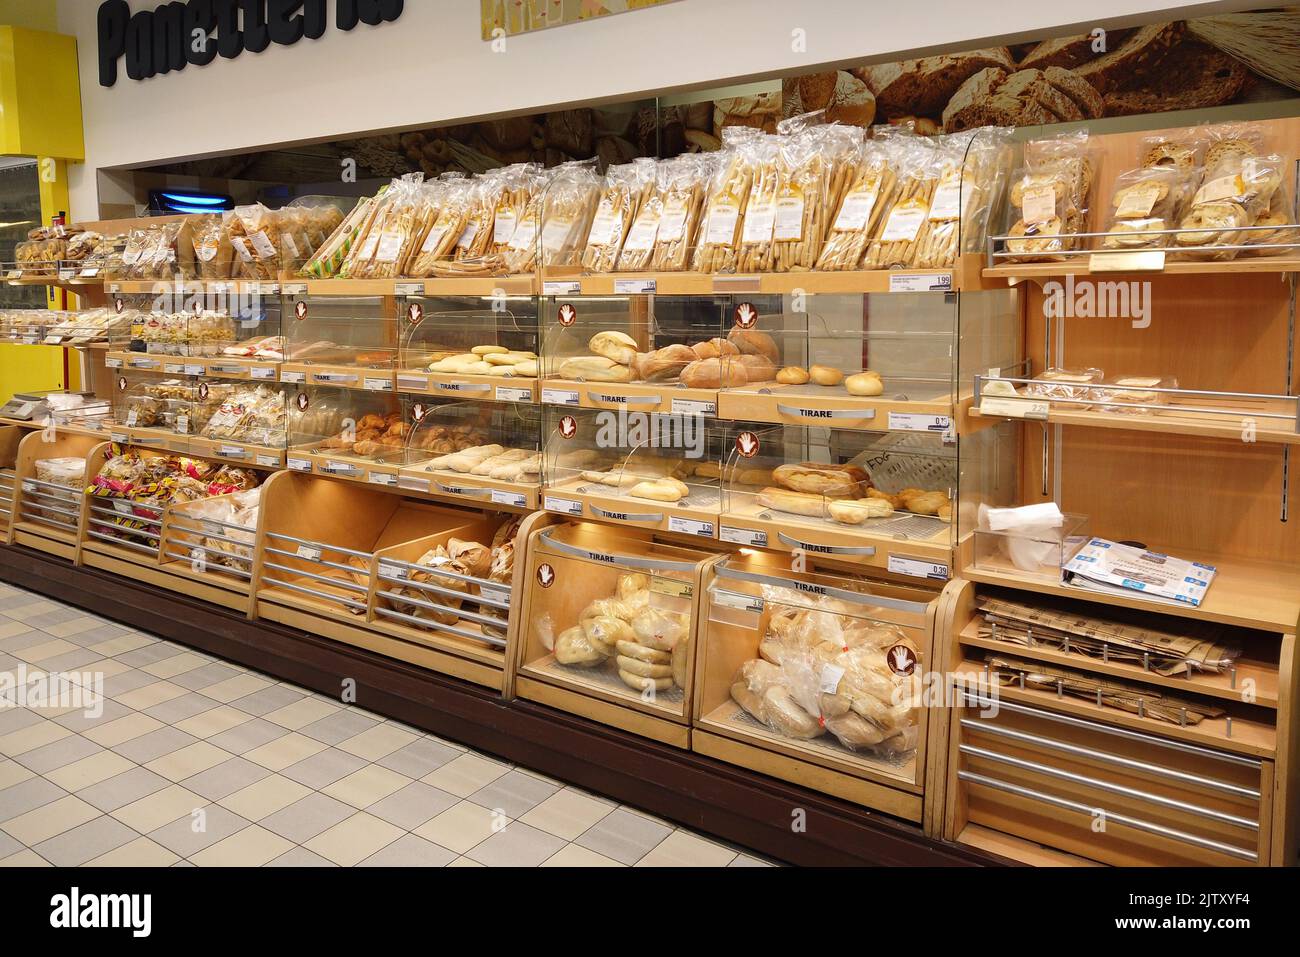 Fossano, Italy - August 30, 2022: shelf with different types of bread in the bakery department of the Italian supermarket Eurospin Stock Photo